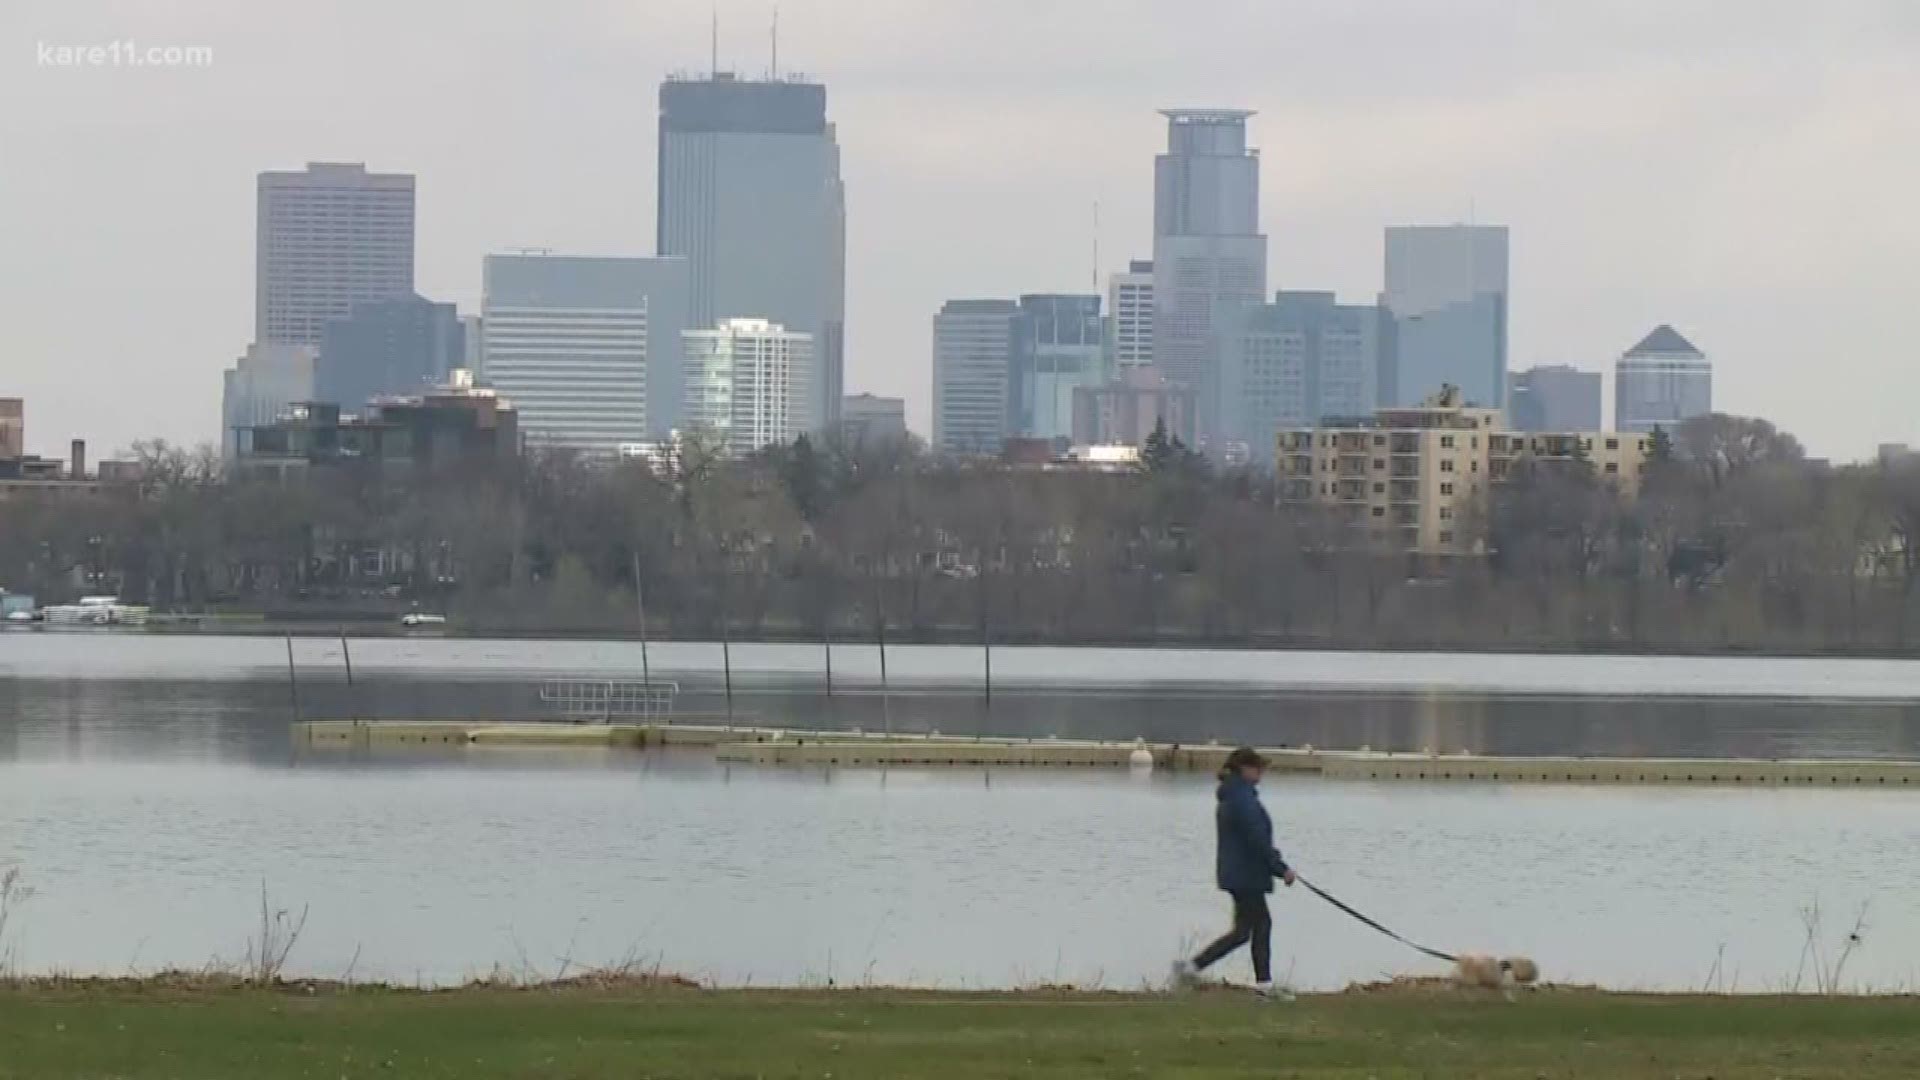 A Monday court ruling reversed the recent name change for one of Minneapolis' most popular lakes, but the mayor and the parks board are pushing back. And even if the name changes back to Lake Calhoun, the federal name will remain Bde Maka Ska. https://kare11.tv/2UKieGh